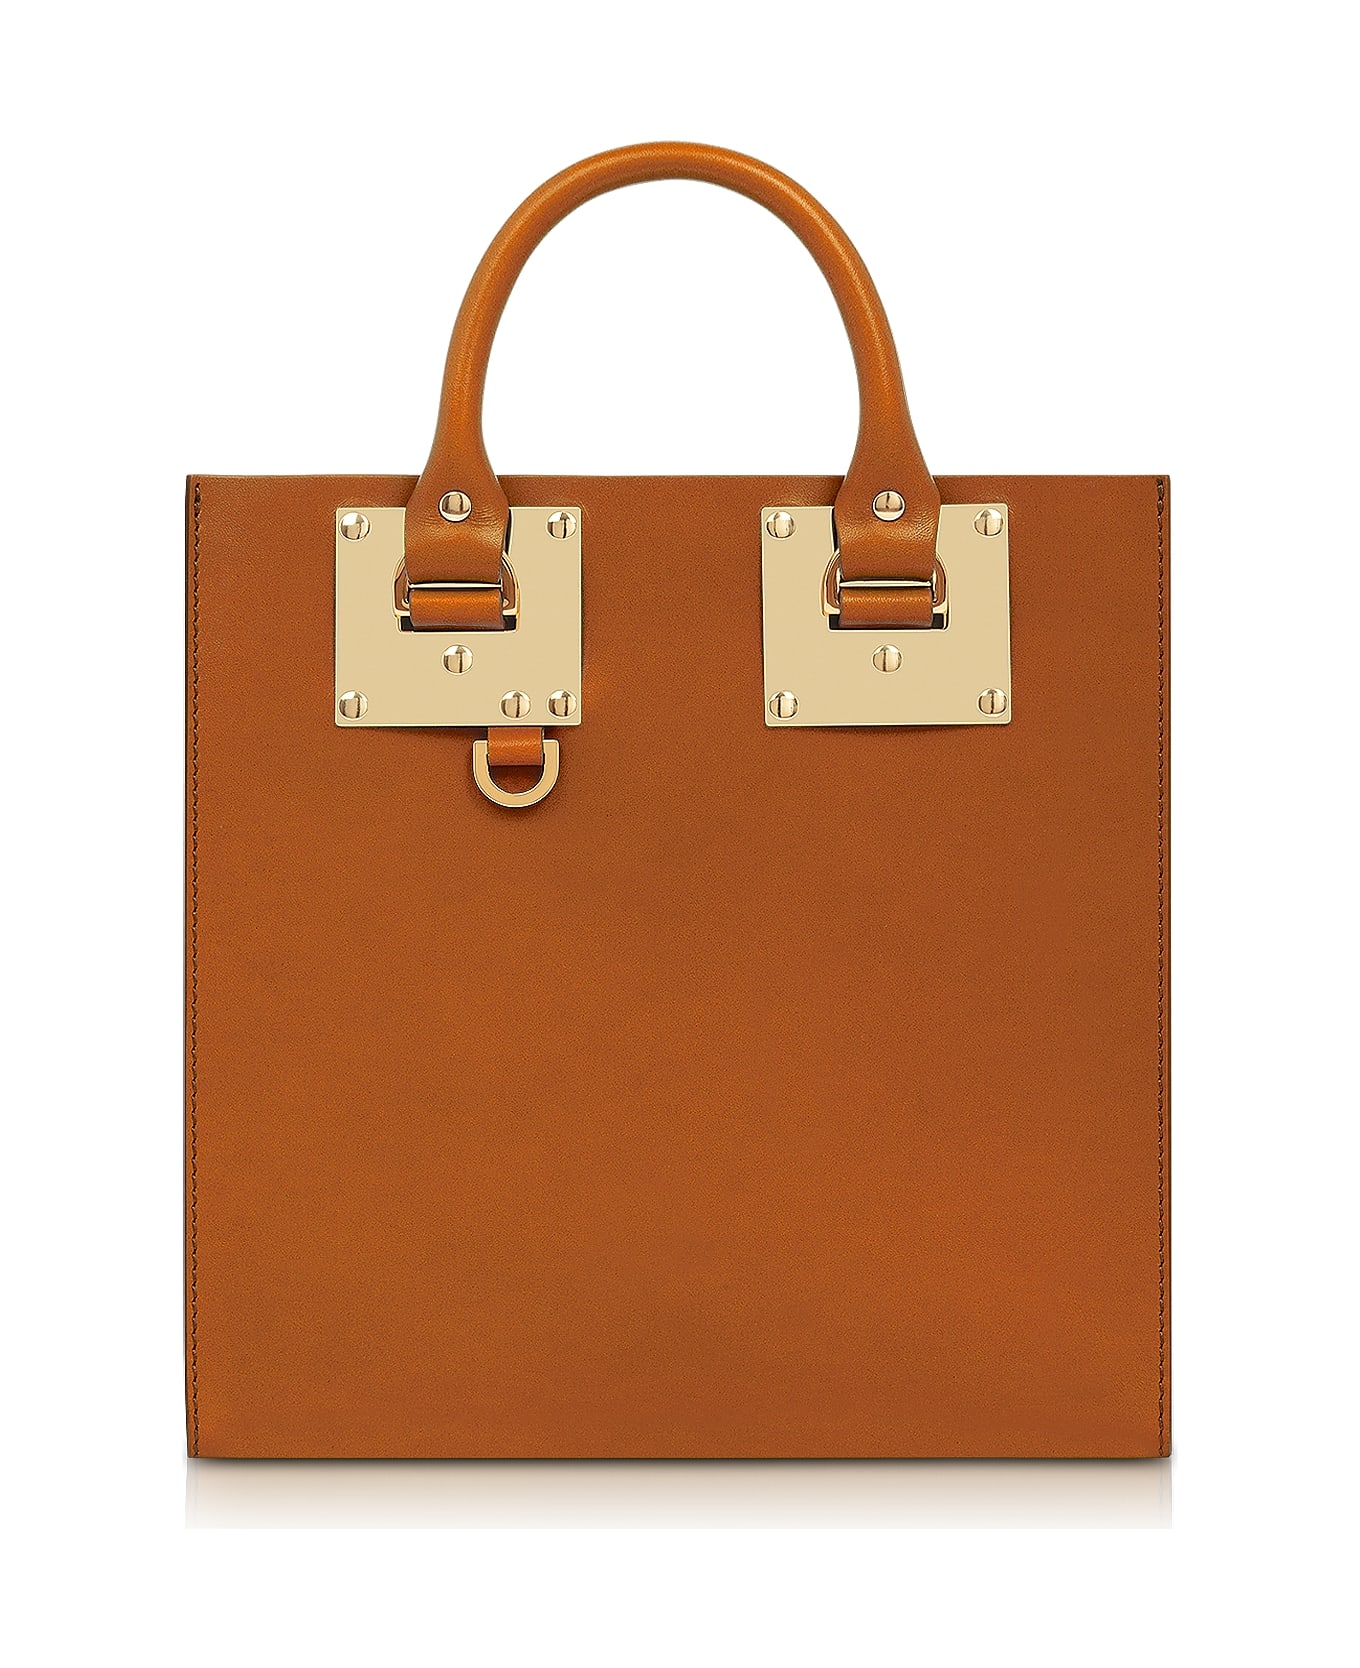 Sophie Hulme Tan Albion Square Leather Tote | italist, ALWAYS LIKE A SALE